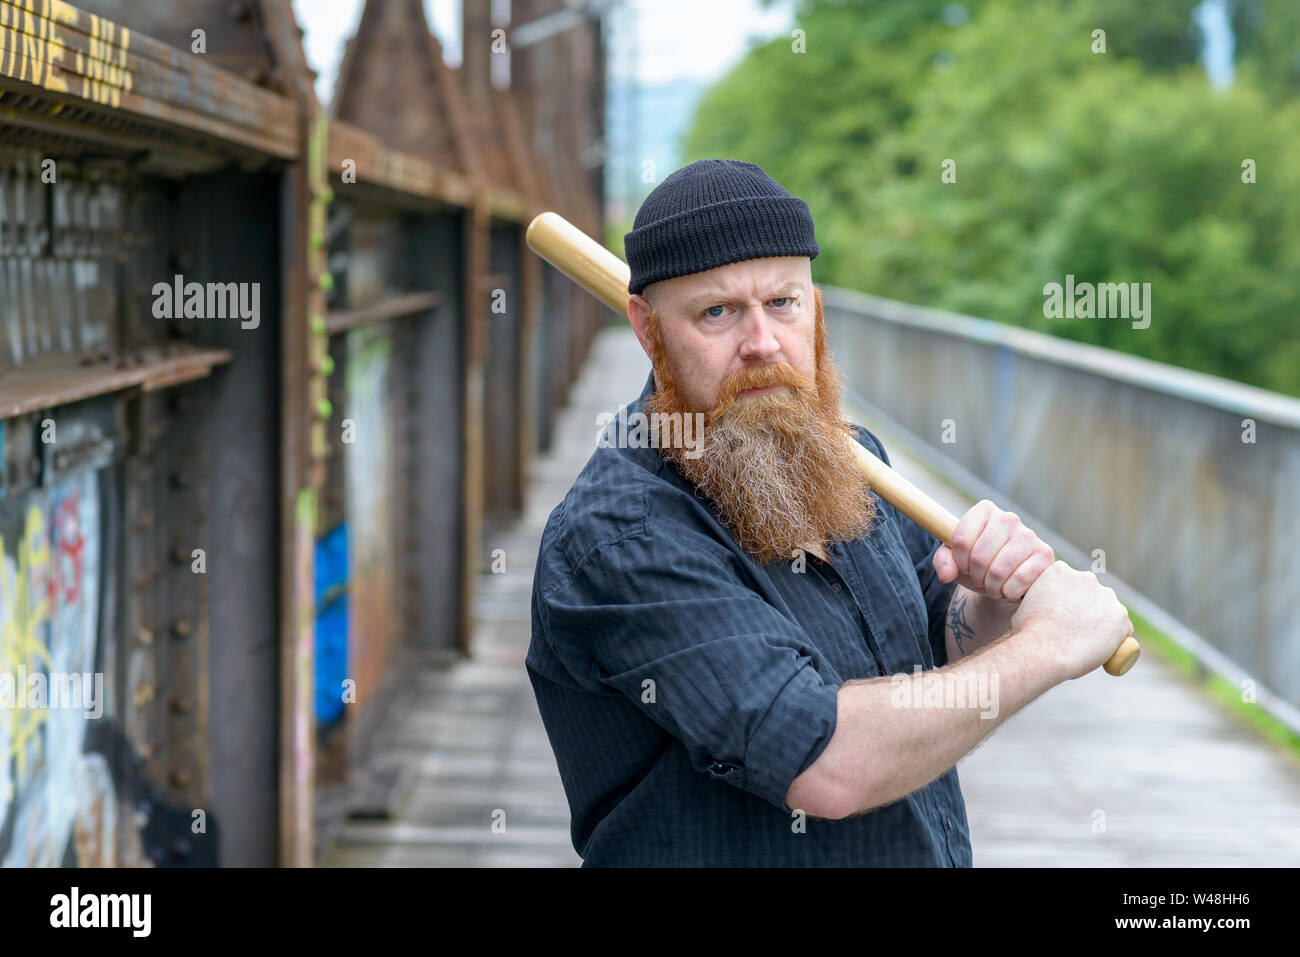 Threatening angry man with a red beard wearing a knitted beanie hat swinging a baseball bat over his shoulder while focusing his eyes on the camera Stock Photo